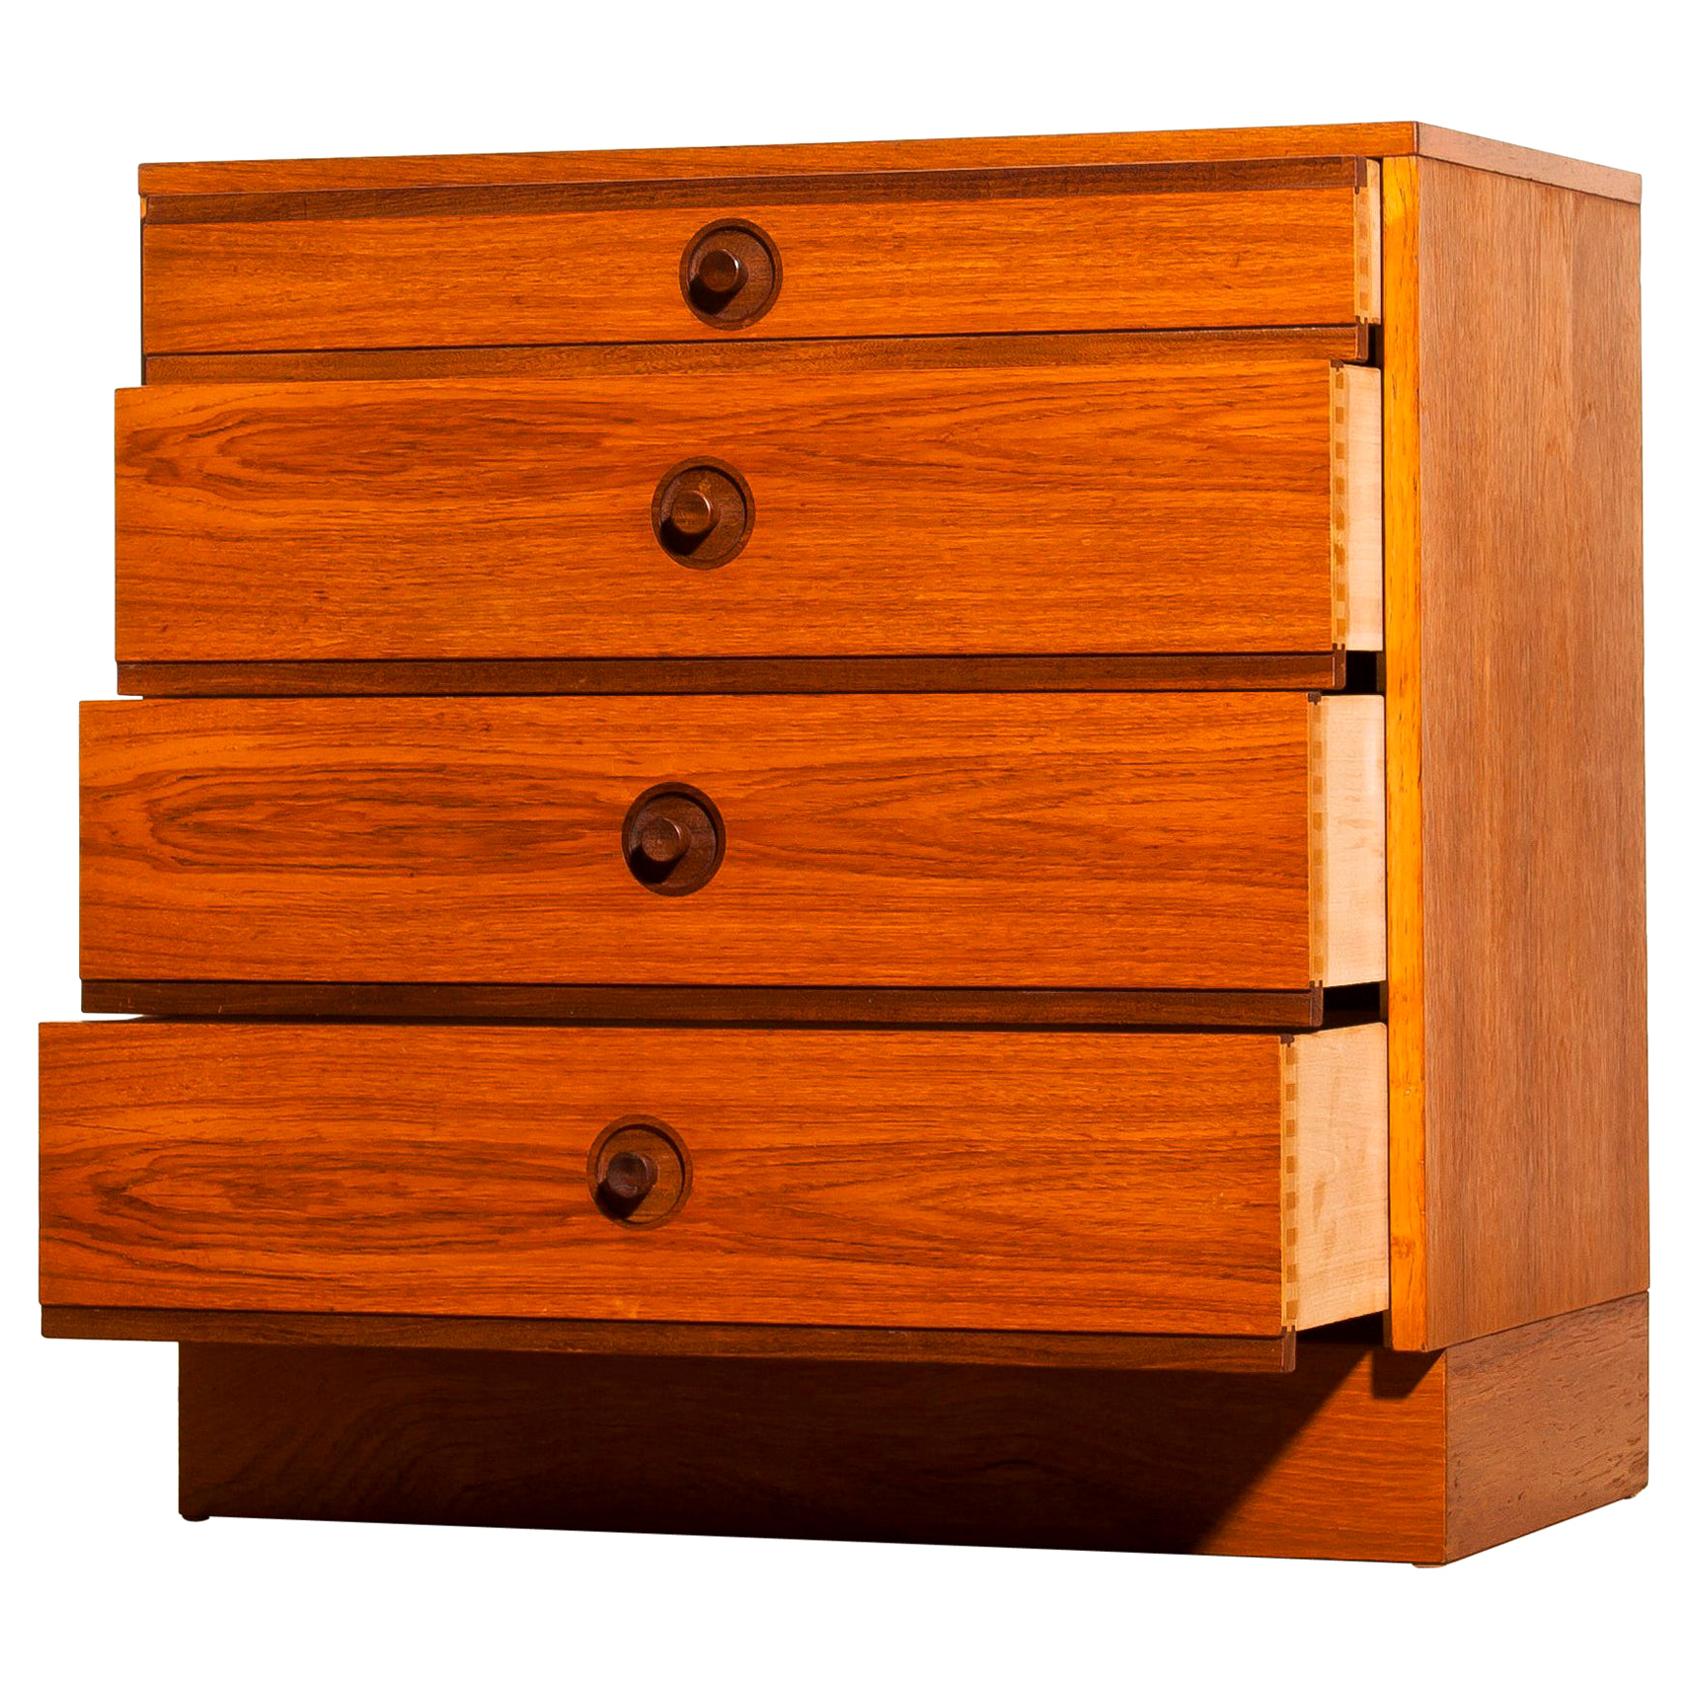 Very nice chest of drawers by Børge Mogensen for Karl Andersson & Söner, Denmark.
This cabinet is made of teak and has four drawers.
It is in beautiful condition.
Period 1950s.
Dimensions: H 68 cm x W 66 cm x D 40 cm.